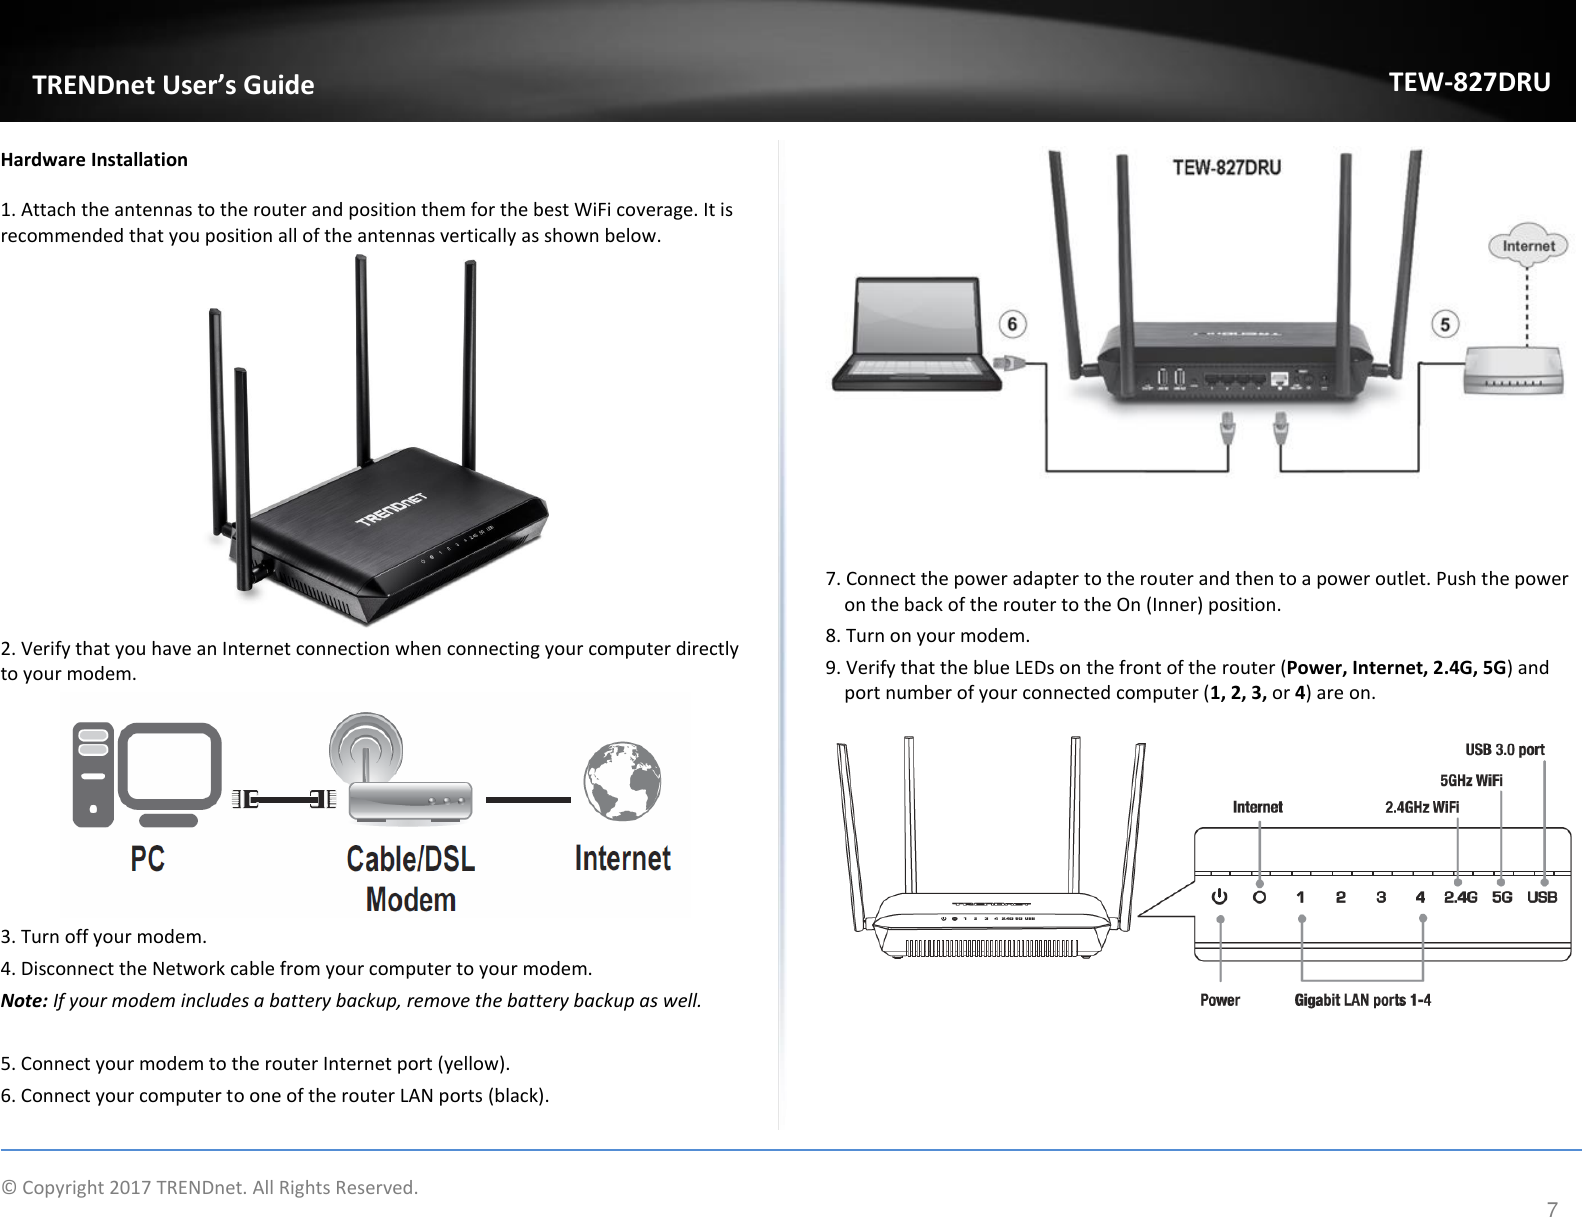             © Copyright 2017 TRENDnet. All Rights Reserved.       TRENDnet User’s Guide TEW-827DRU 7 Hardware Installation 1. Attach the antennas to the router and position them for the best WiFi coverage. It is recommended that you position all of the antennas vertically as shown below.   2. Verify that you have an Internet connection when connecting your computer directly to your modem.   3. Turn off your modem. 4. Disconnect the Network cable from your computer to your modem. Note: If your modem includes a battery backup, remove the battery backup as well.  5. Connect your modem to the router Internet port (yellow). 6. Connect your computer to one of the router LAN ports (black).     7. Connect the power adapter to the router and then to a power outlet. Push the power on the back of the router to the On (Inner) position. 8. Turn on your modem.  9. Verify that the blue LEDs on the front of the router (Power, Internet, 2.4G, 5G) and port number of your connected computer (1, 2, 3, or 4) are on.     